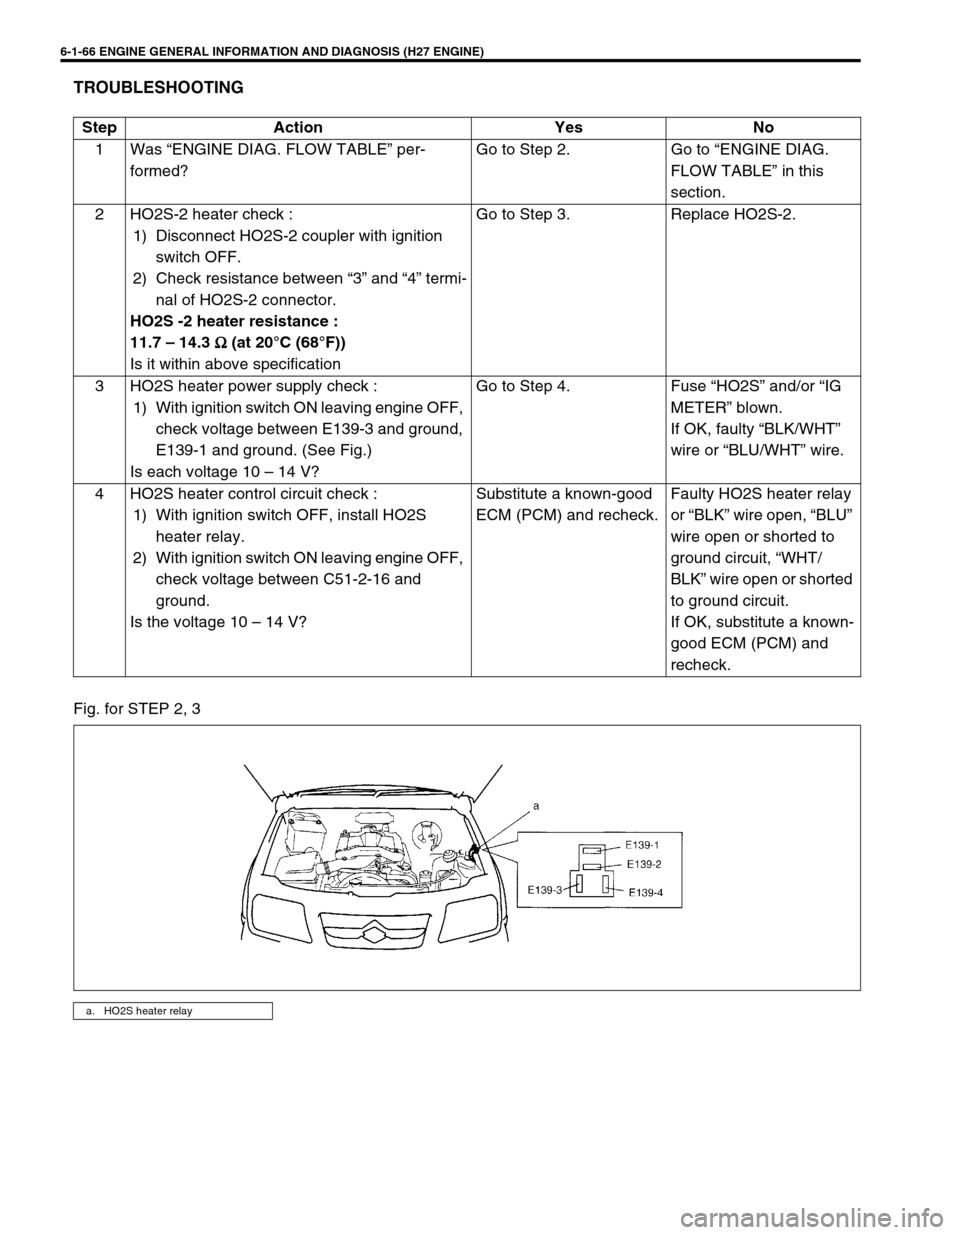 SUZUKI GRAND VITARA 2001 2.G User Guide 6-1-66 ENGINE GENERAL INFORMATION AND DIAGNOSIS (H27 ENGINE)
TROUBLESHOOTING
Fig. for STEP 2, 3Step Action Yes No
1 Was “ENGINE DIAG. FLOW TABLE” per-
formed?Go to Step 2. Go to “ENGINE DIAG. 
F